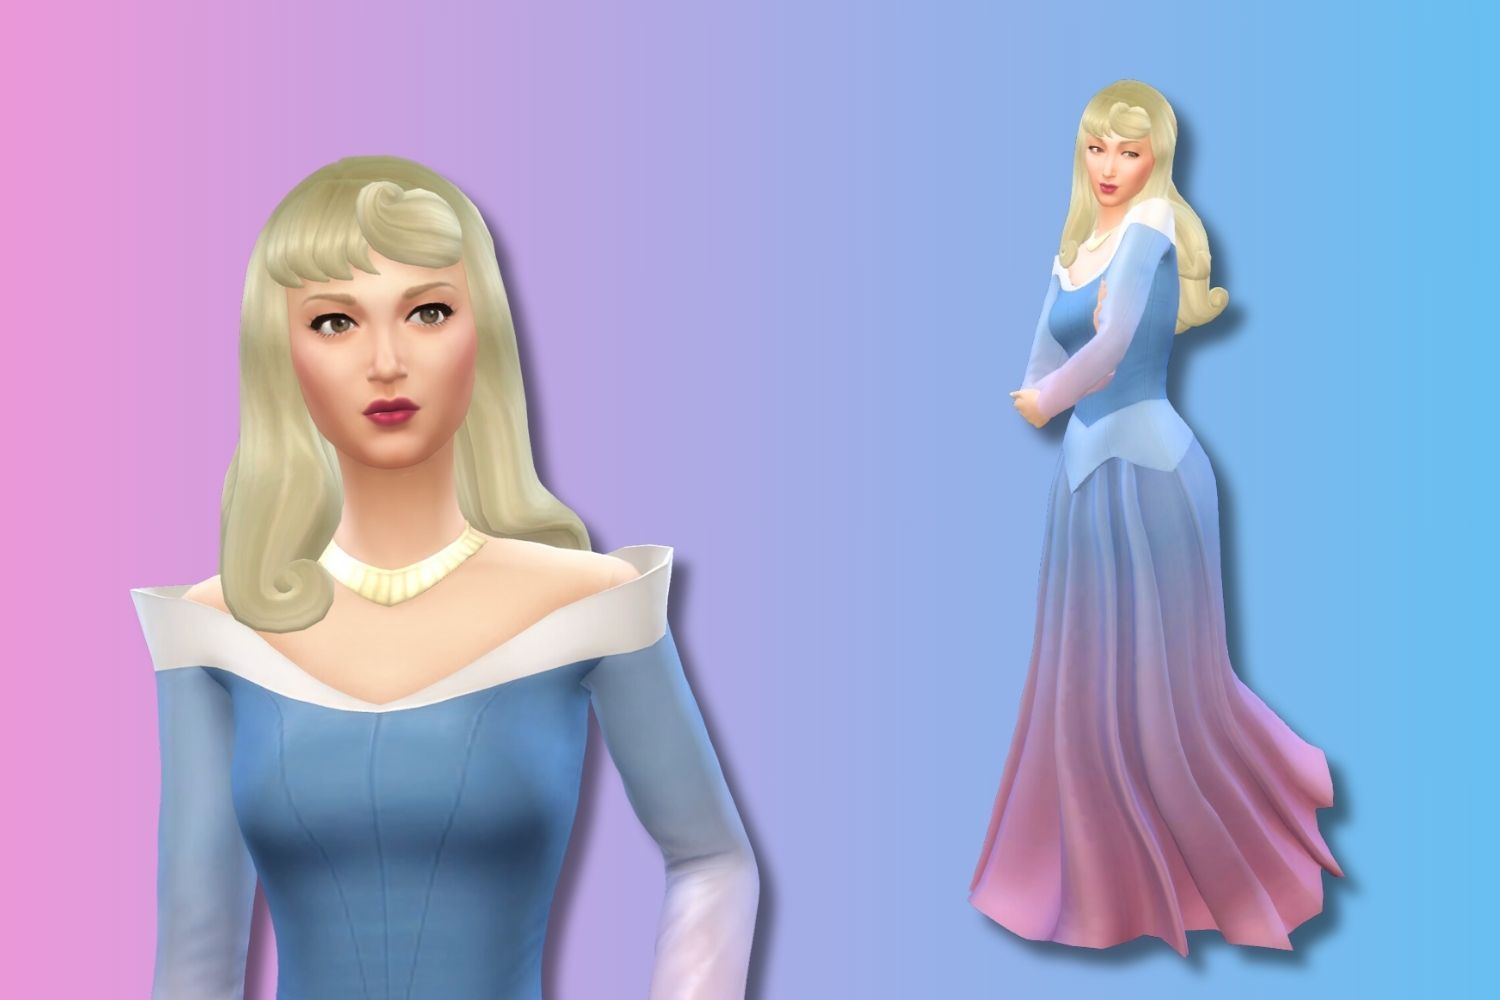 A Sim that looks like Aurora from Disney's Sleeping Beauty stands against a blue and pink background.